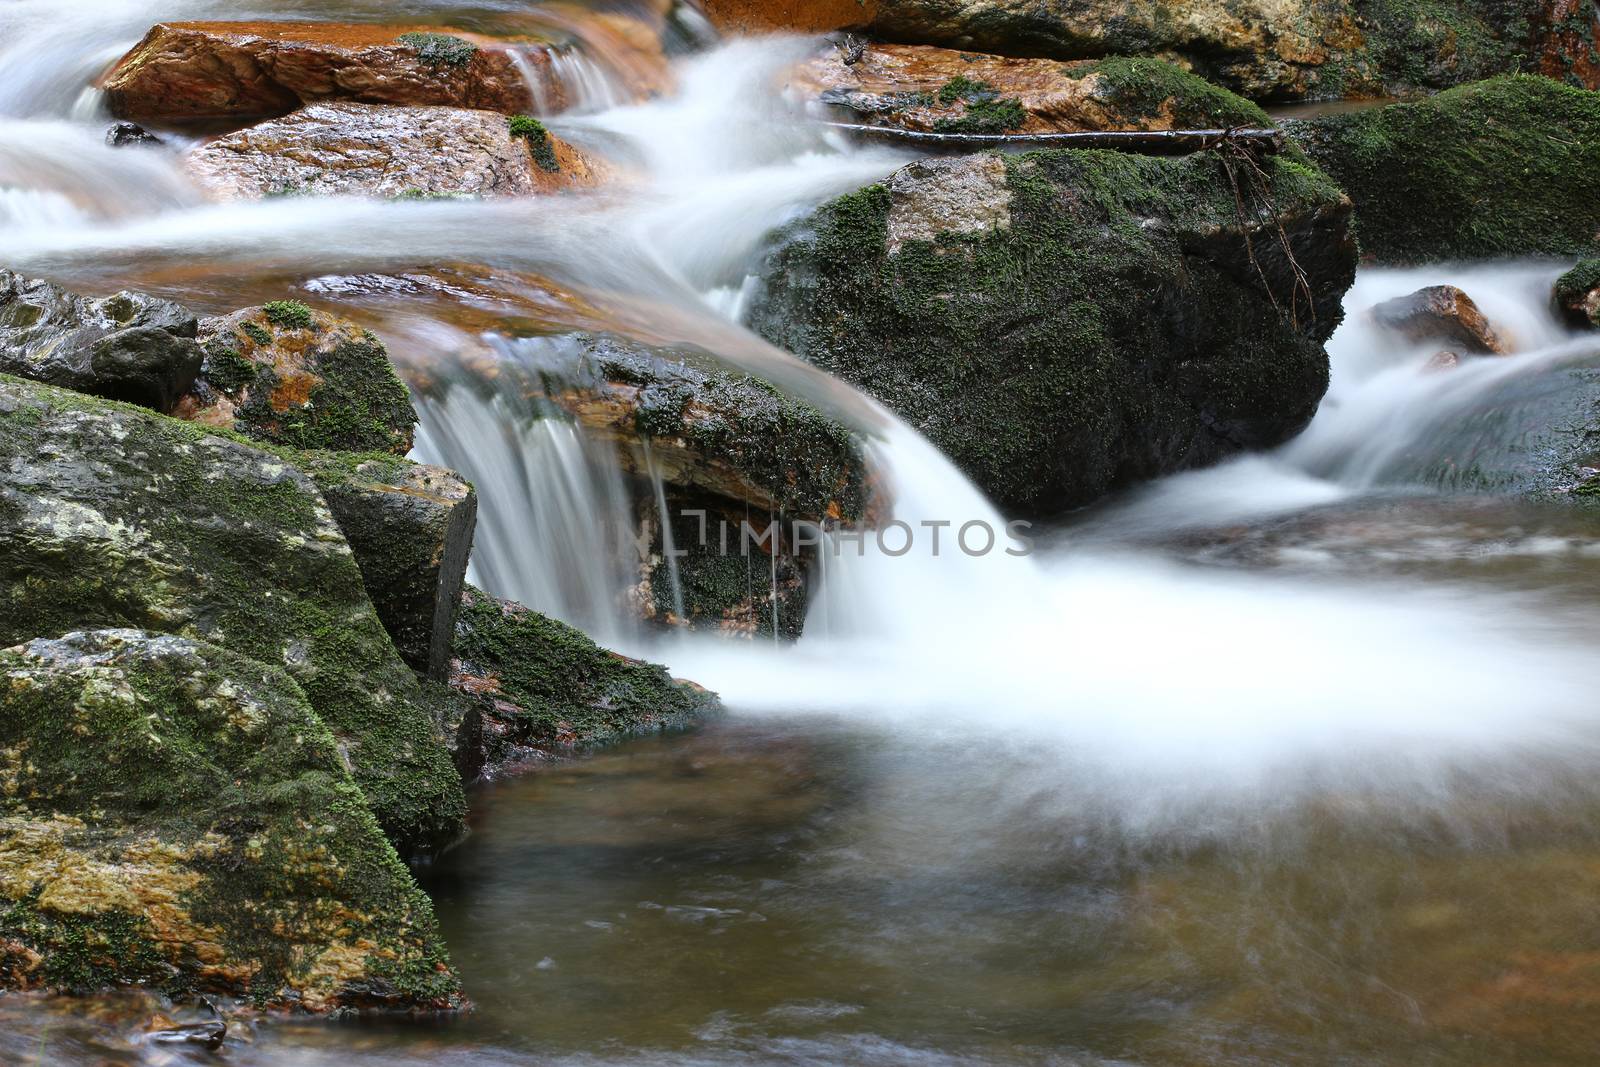 Water flowing over rocks - long exposure by Mibuch